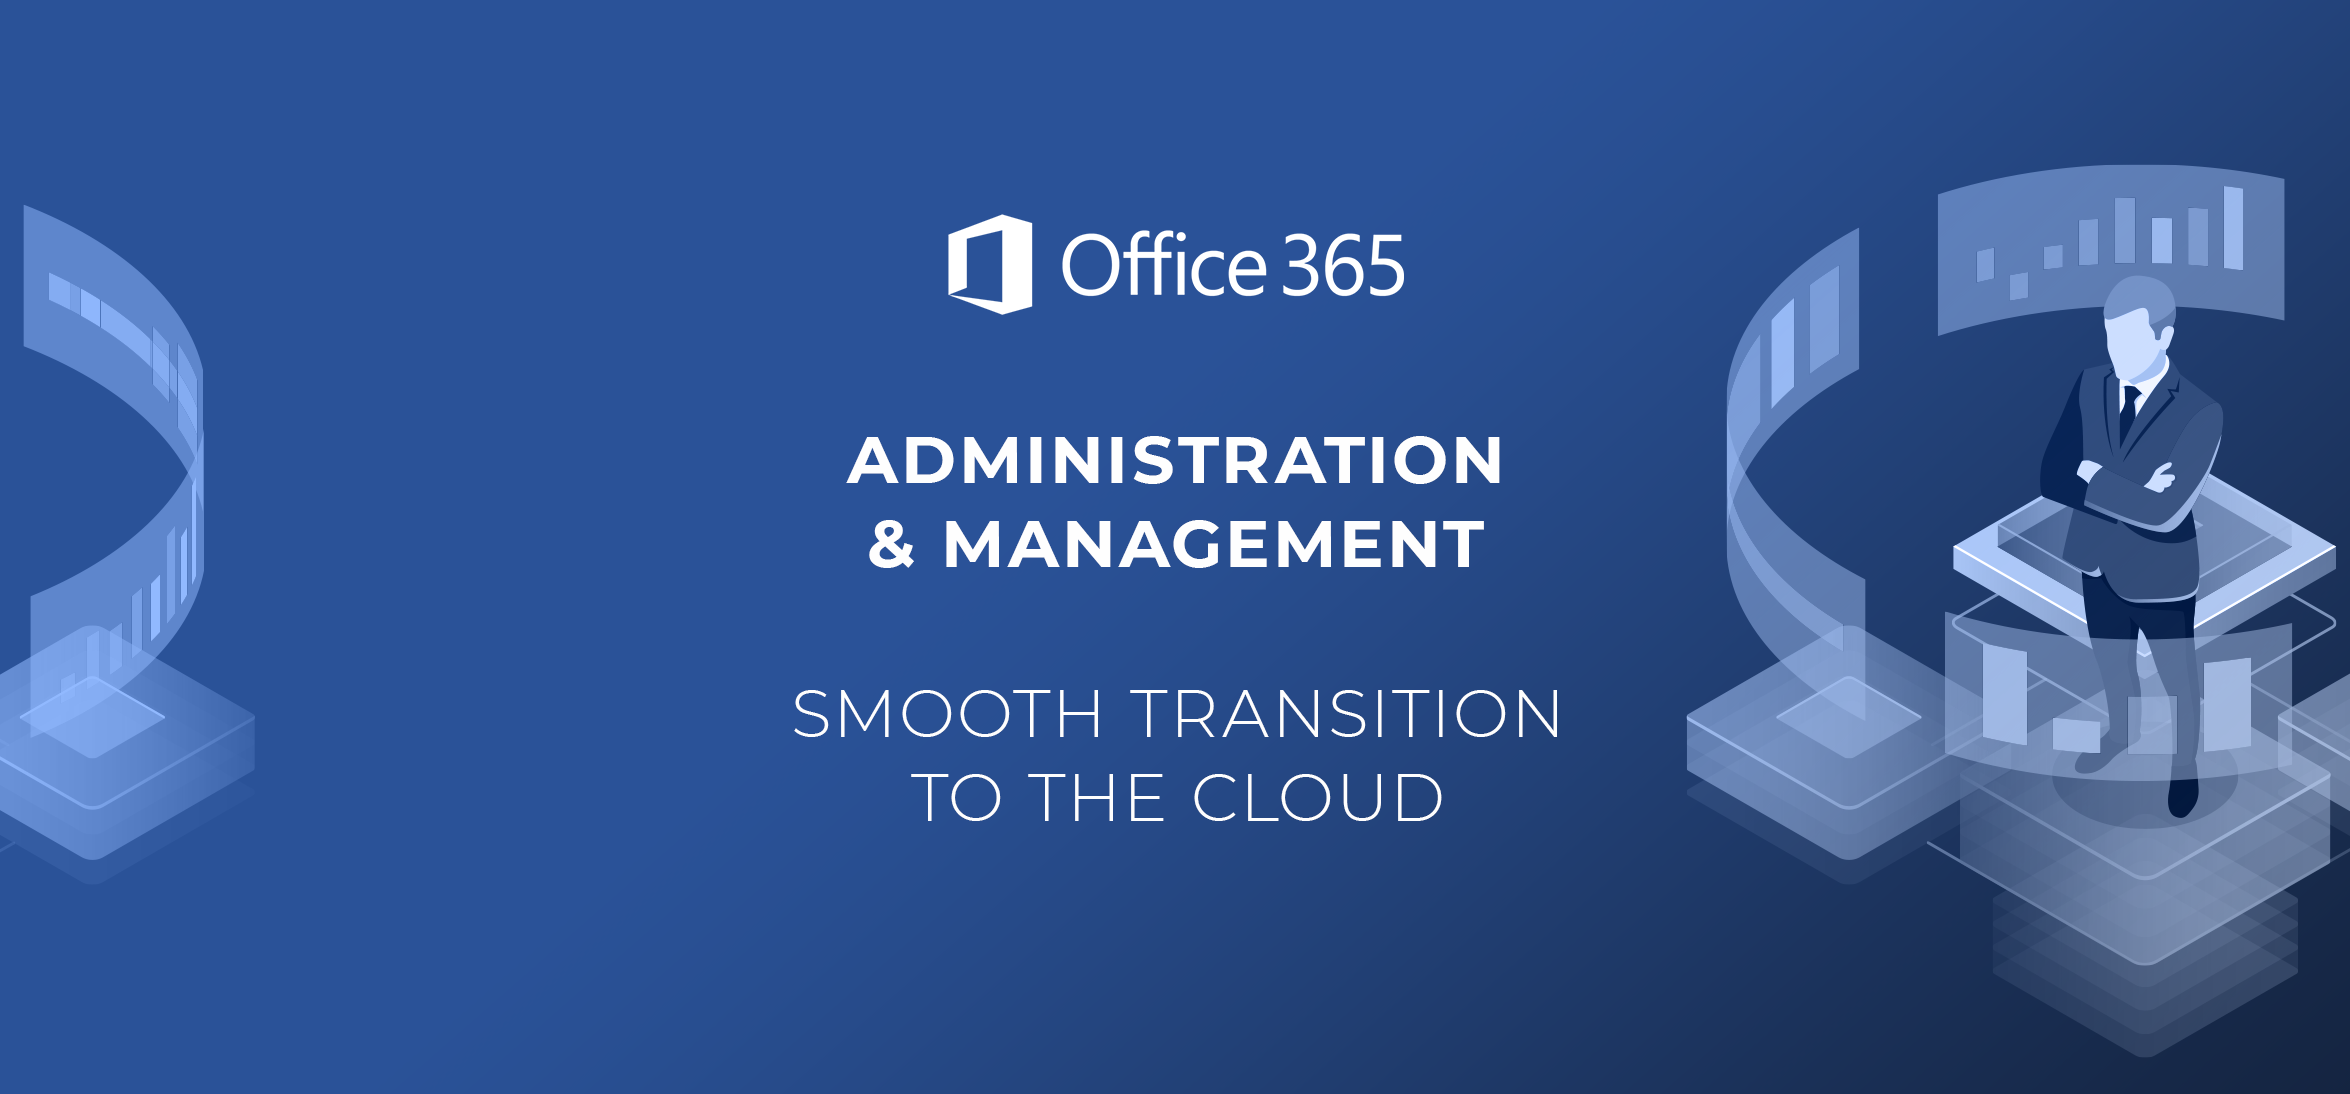 Microsoft Office 365 Administration Services in Alpine CA, 91901